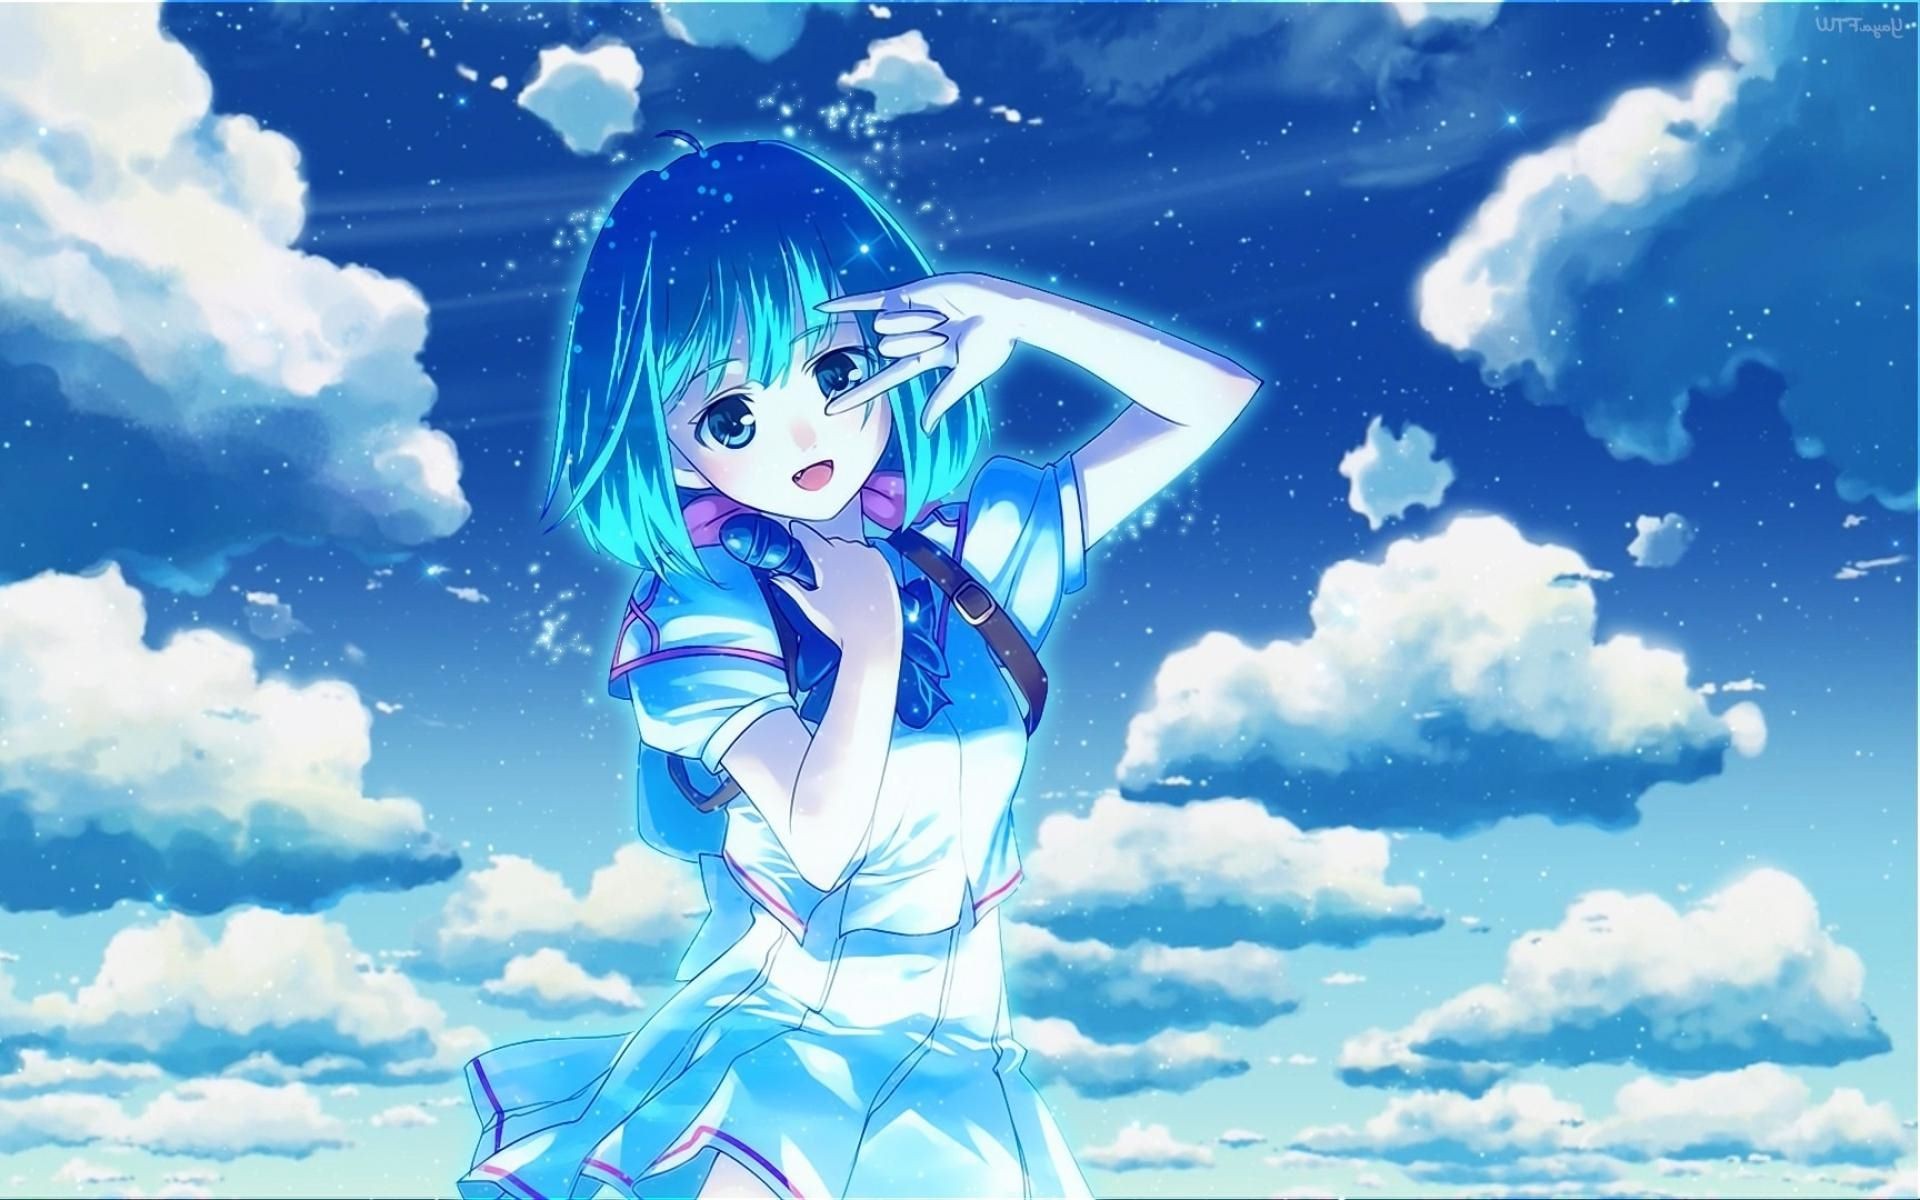 Kawaii wallpaper ·① Download free cool HD wallpapers for ...